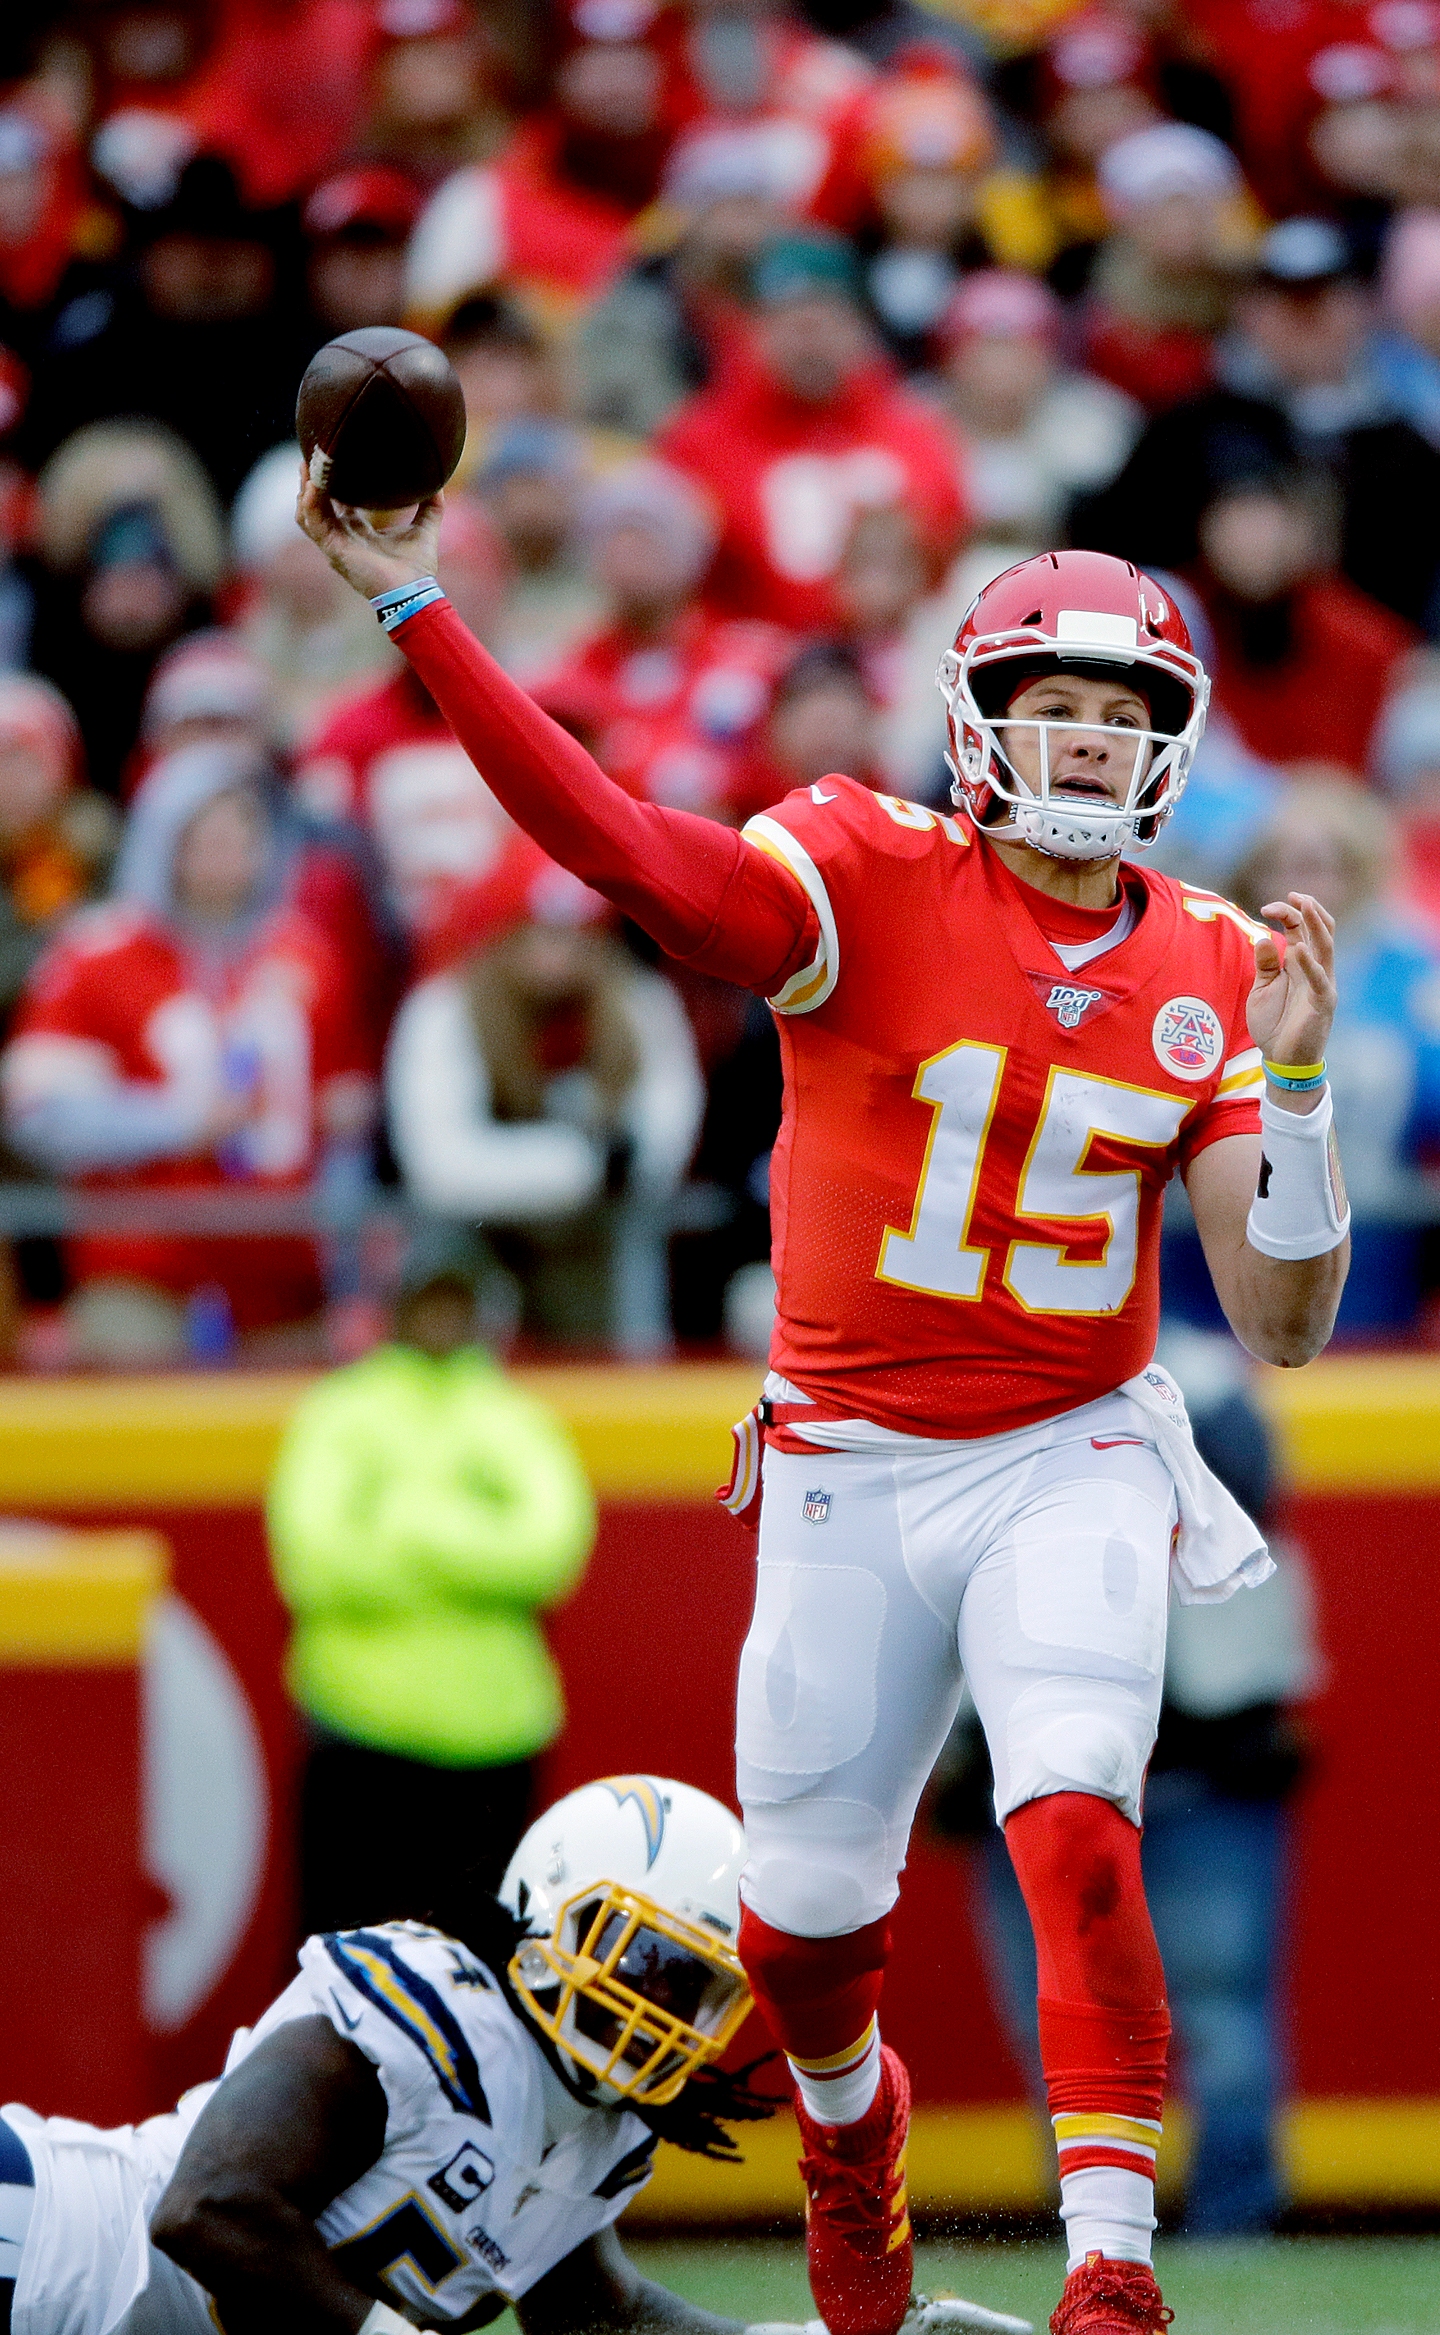 Chiefs Top Bolts 31 21 To Earn No. 2 Seed, First Round Bye